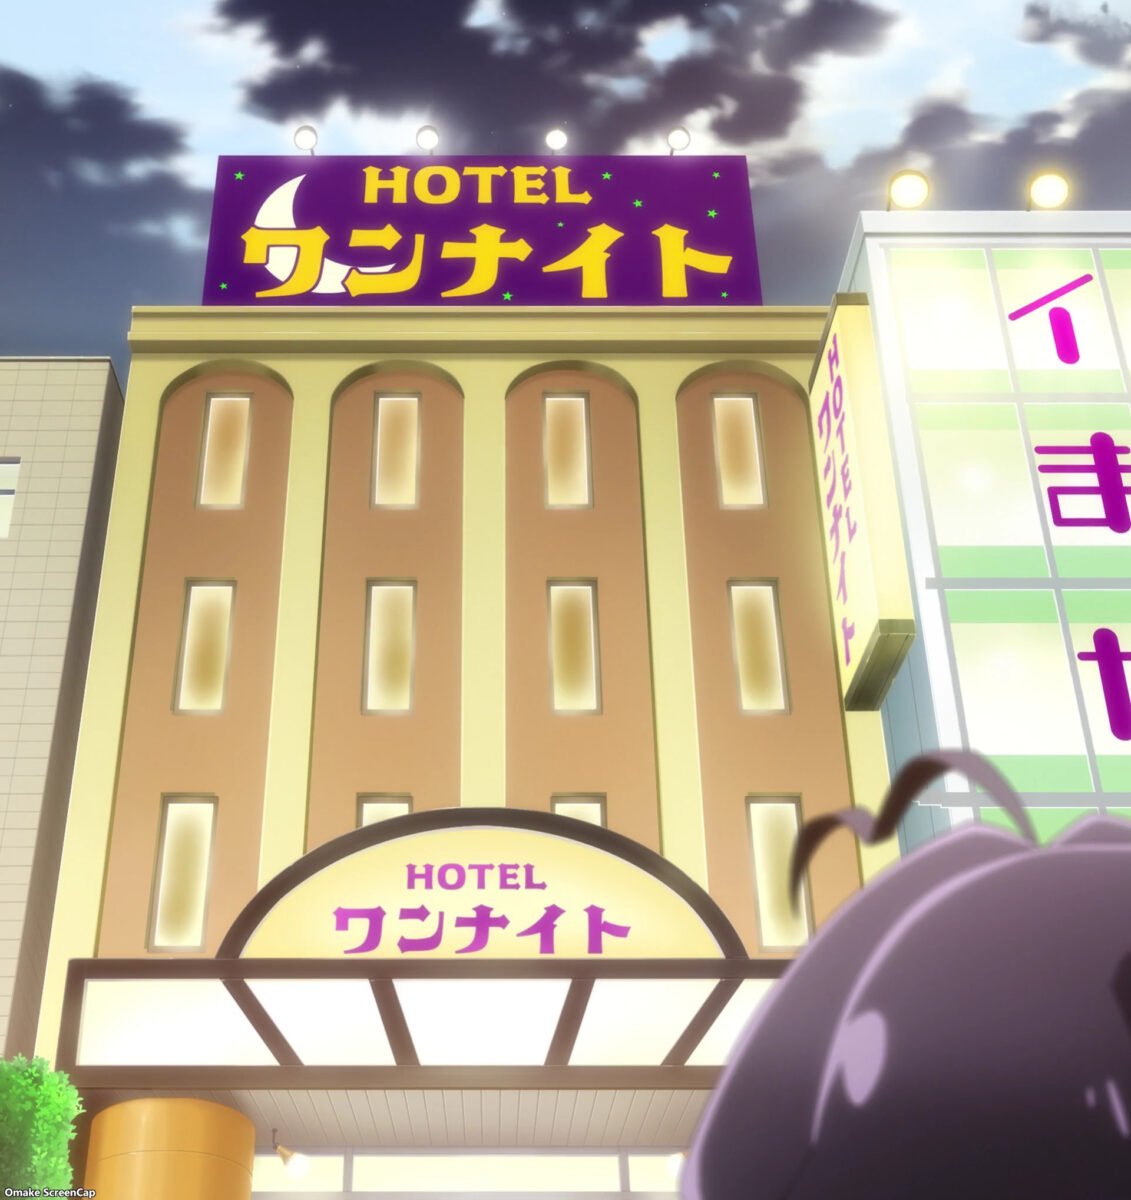 Gushing Over Magical Girls Episode 3 Hotel One Night